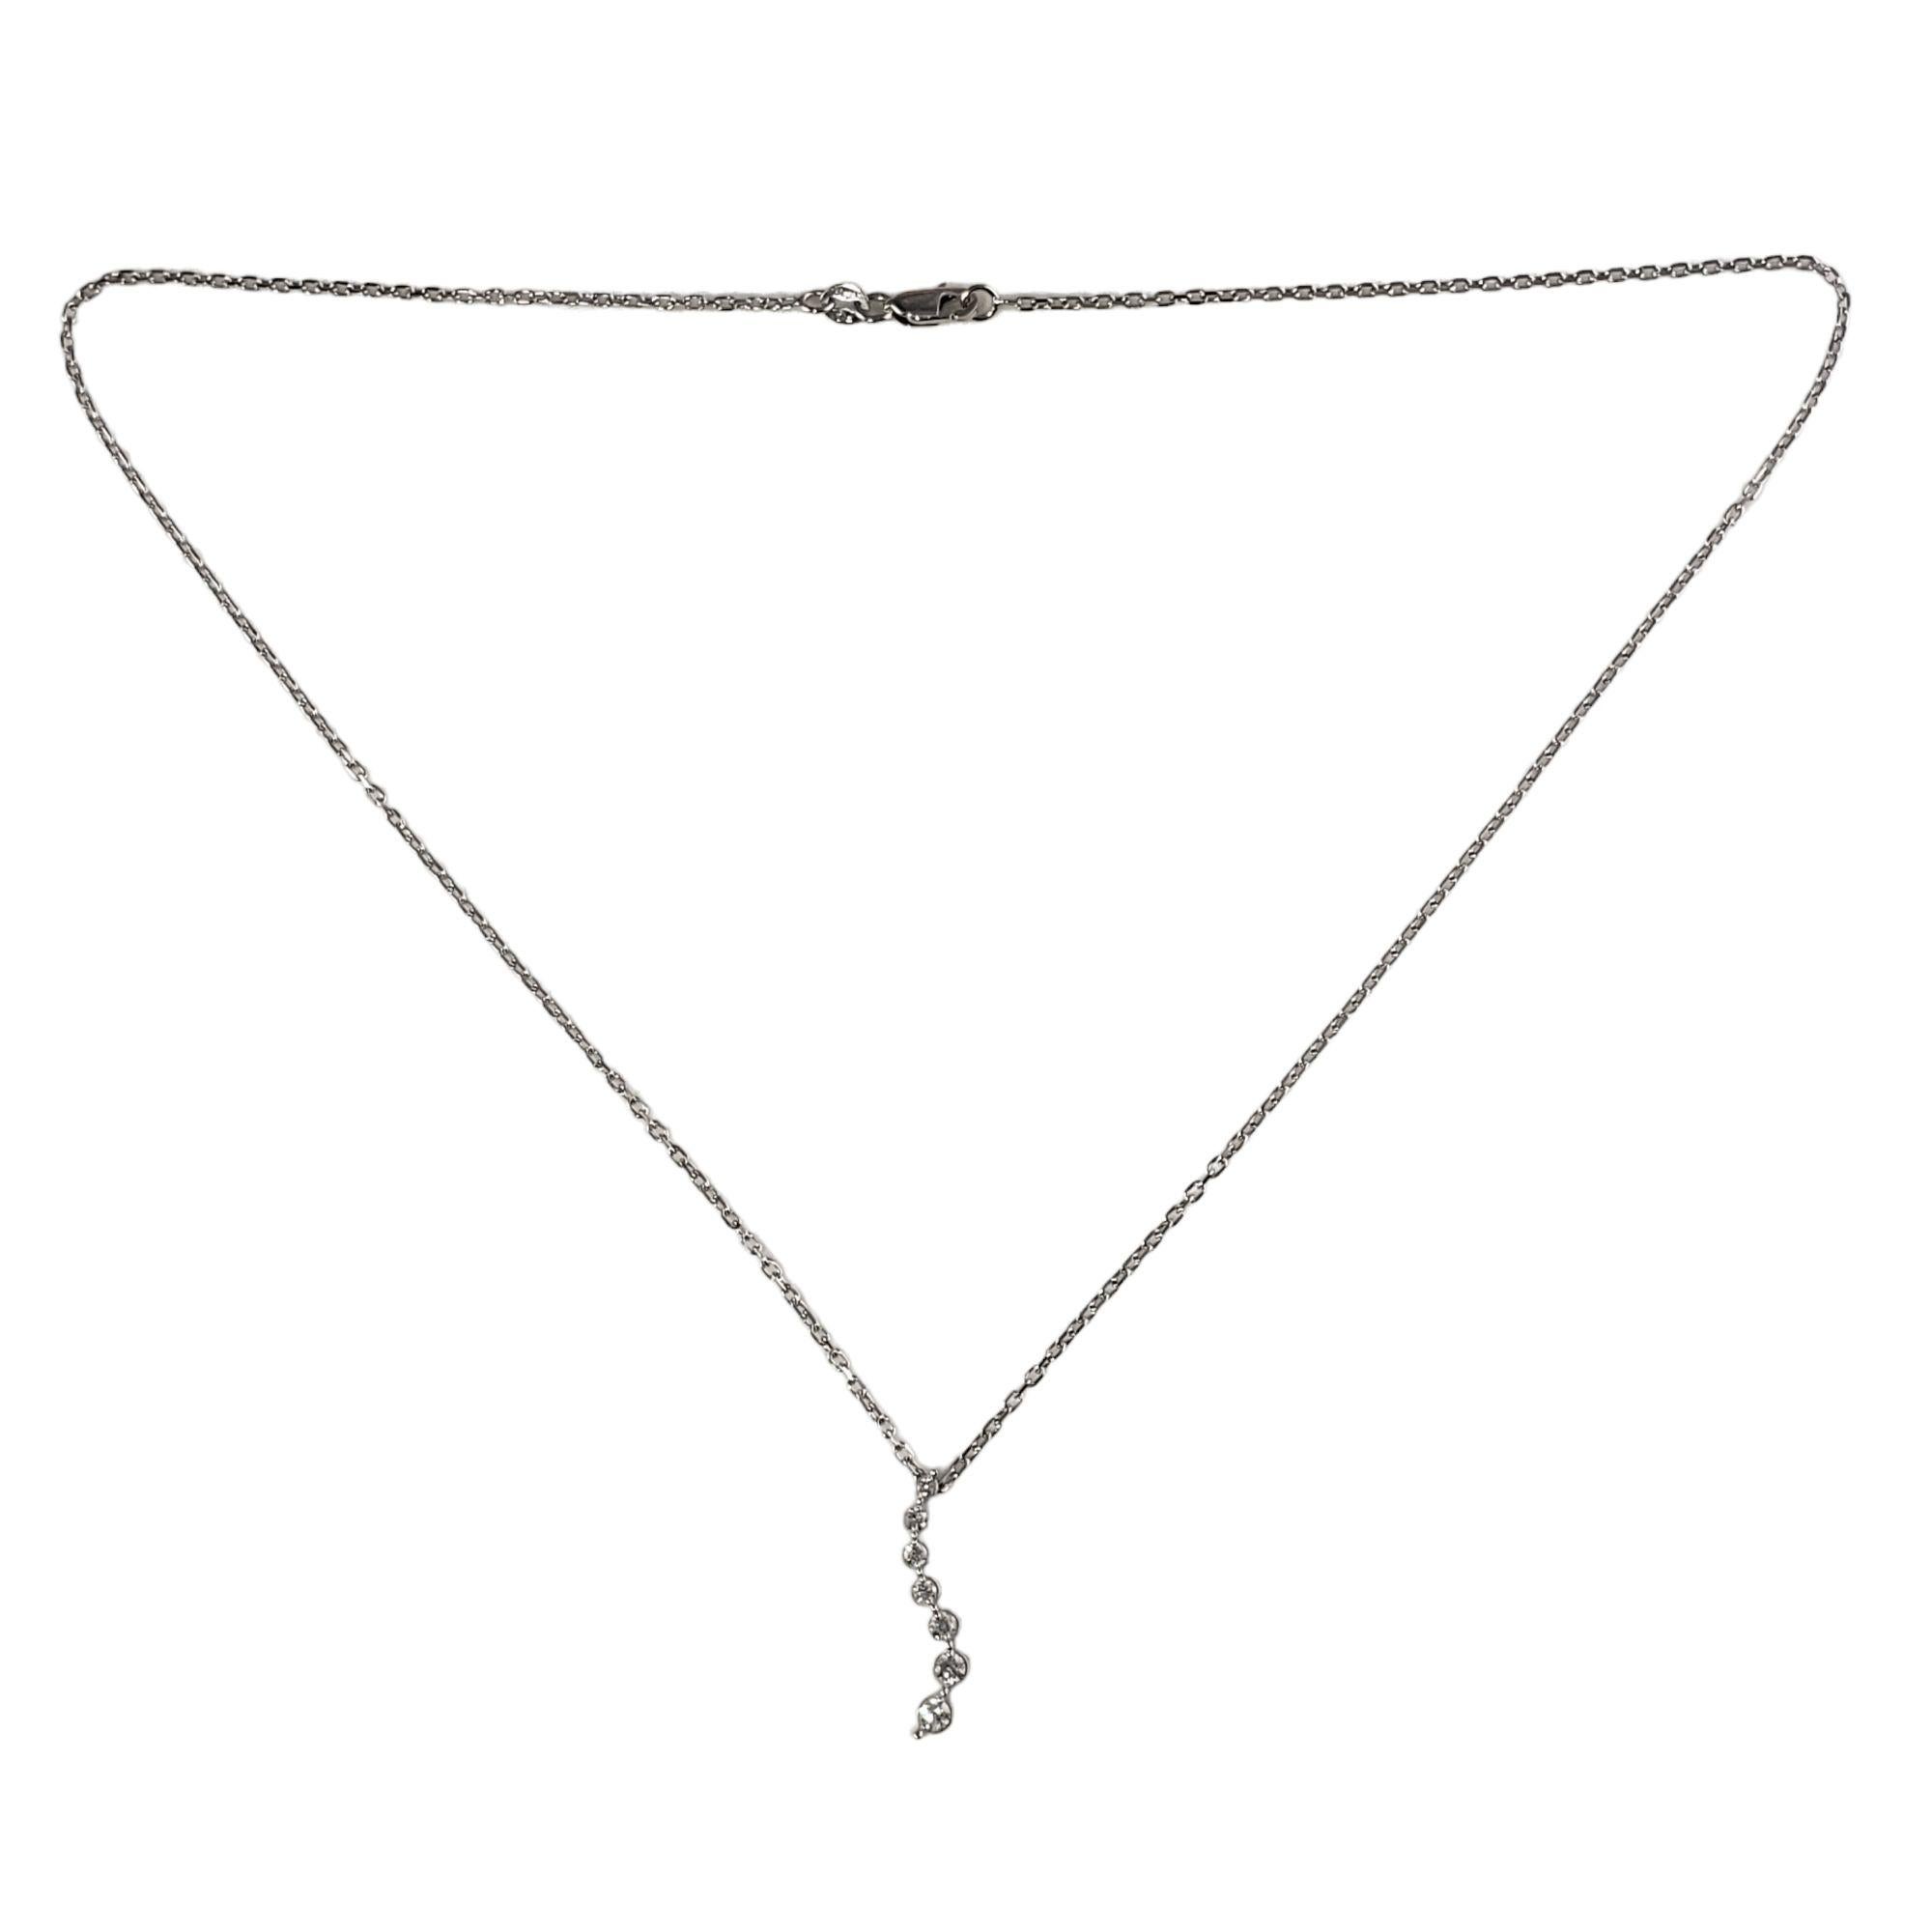 Vintage 14 Karat White Gold Graduated Diamond Pendant Necklace-

This lovely graduated diamond pendant features seven round brilliant cut diamonds set in 14K white gold. Suspends from a classic cable chain.

Approximate total diamond weight: .20